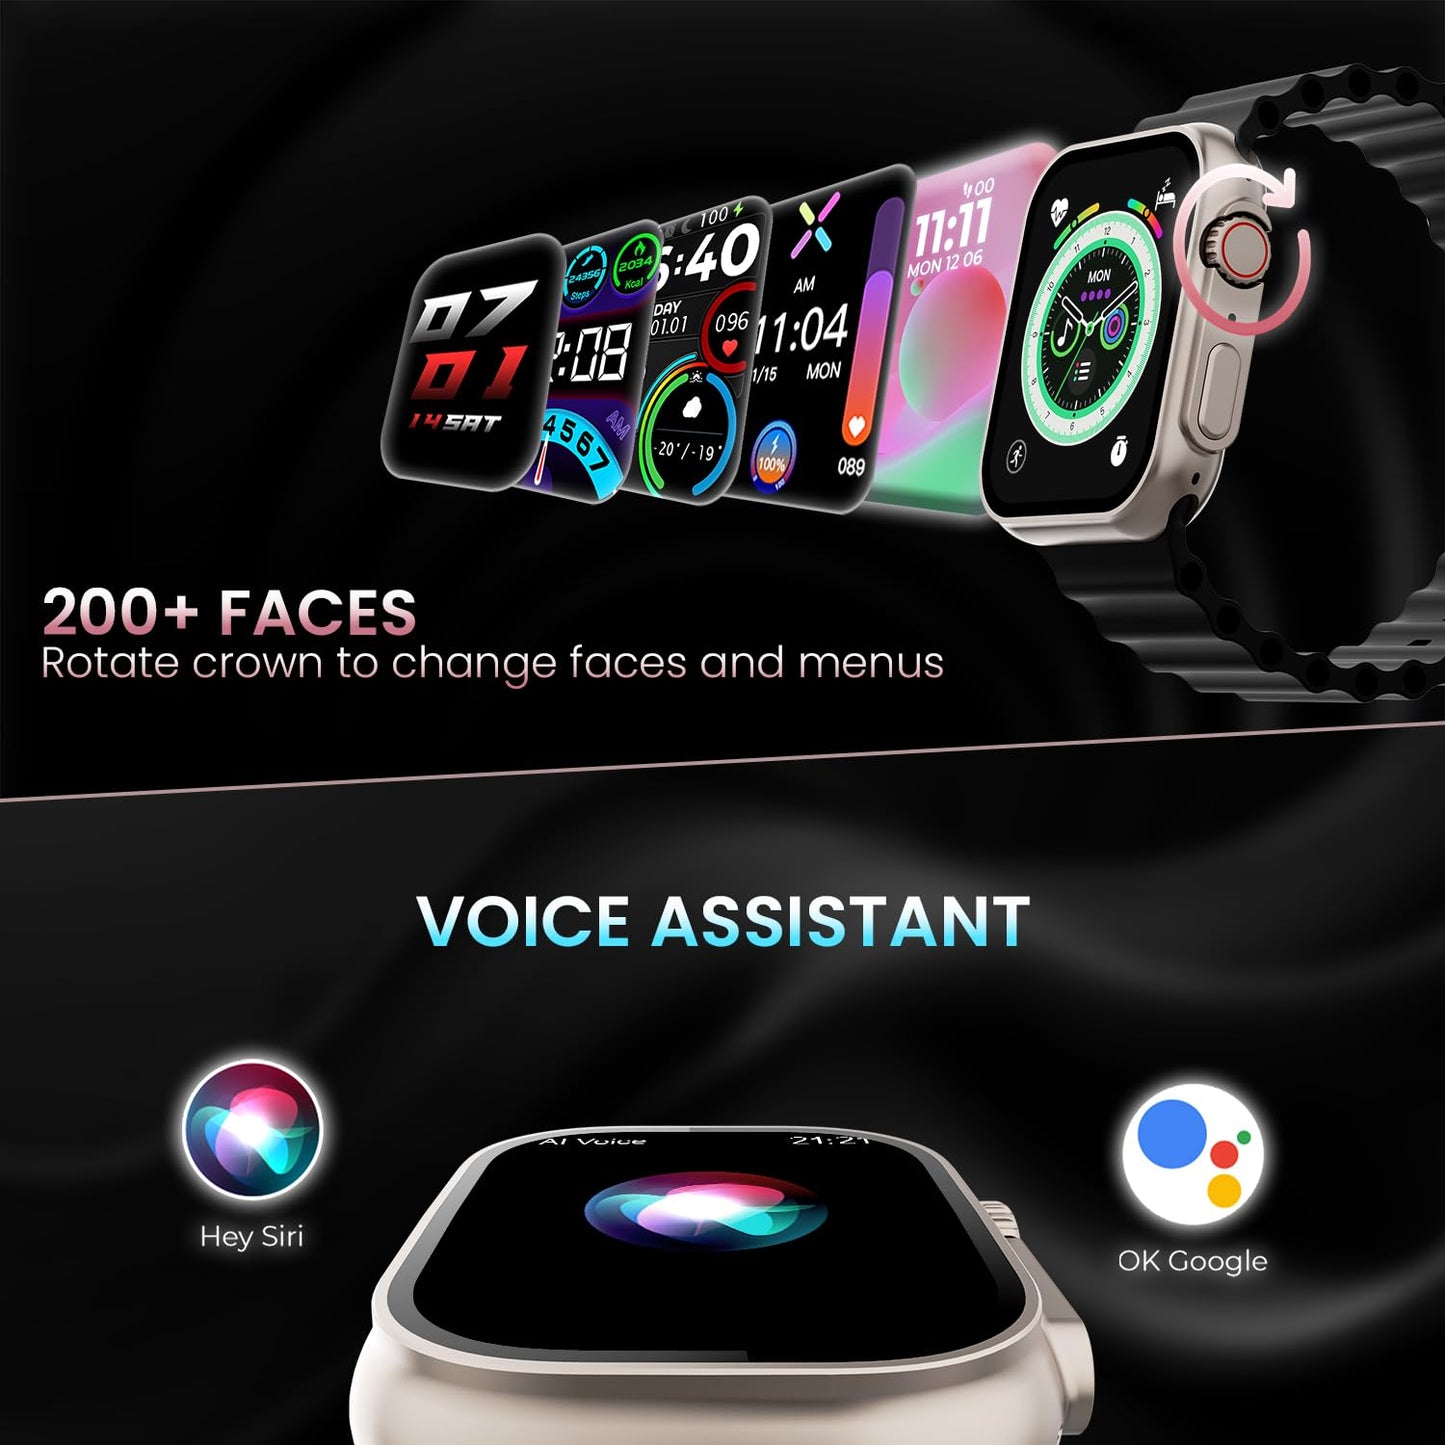 Kratos SW16 Ultra Smartwatch with 1.85" Full Touch Display, Bluetooth Calling, Voice Assistant, IP67, 200+ Watch Faces, Multi Sports Modes, Rotating Crown, Metallic Body, Wireless Charging Smart Watch